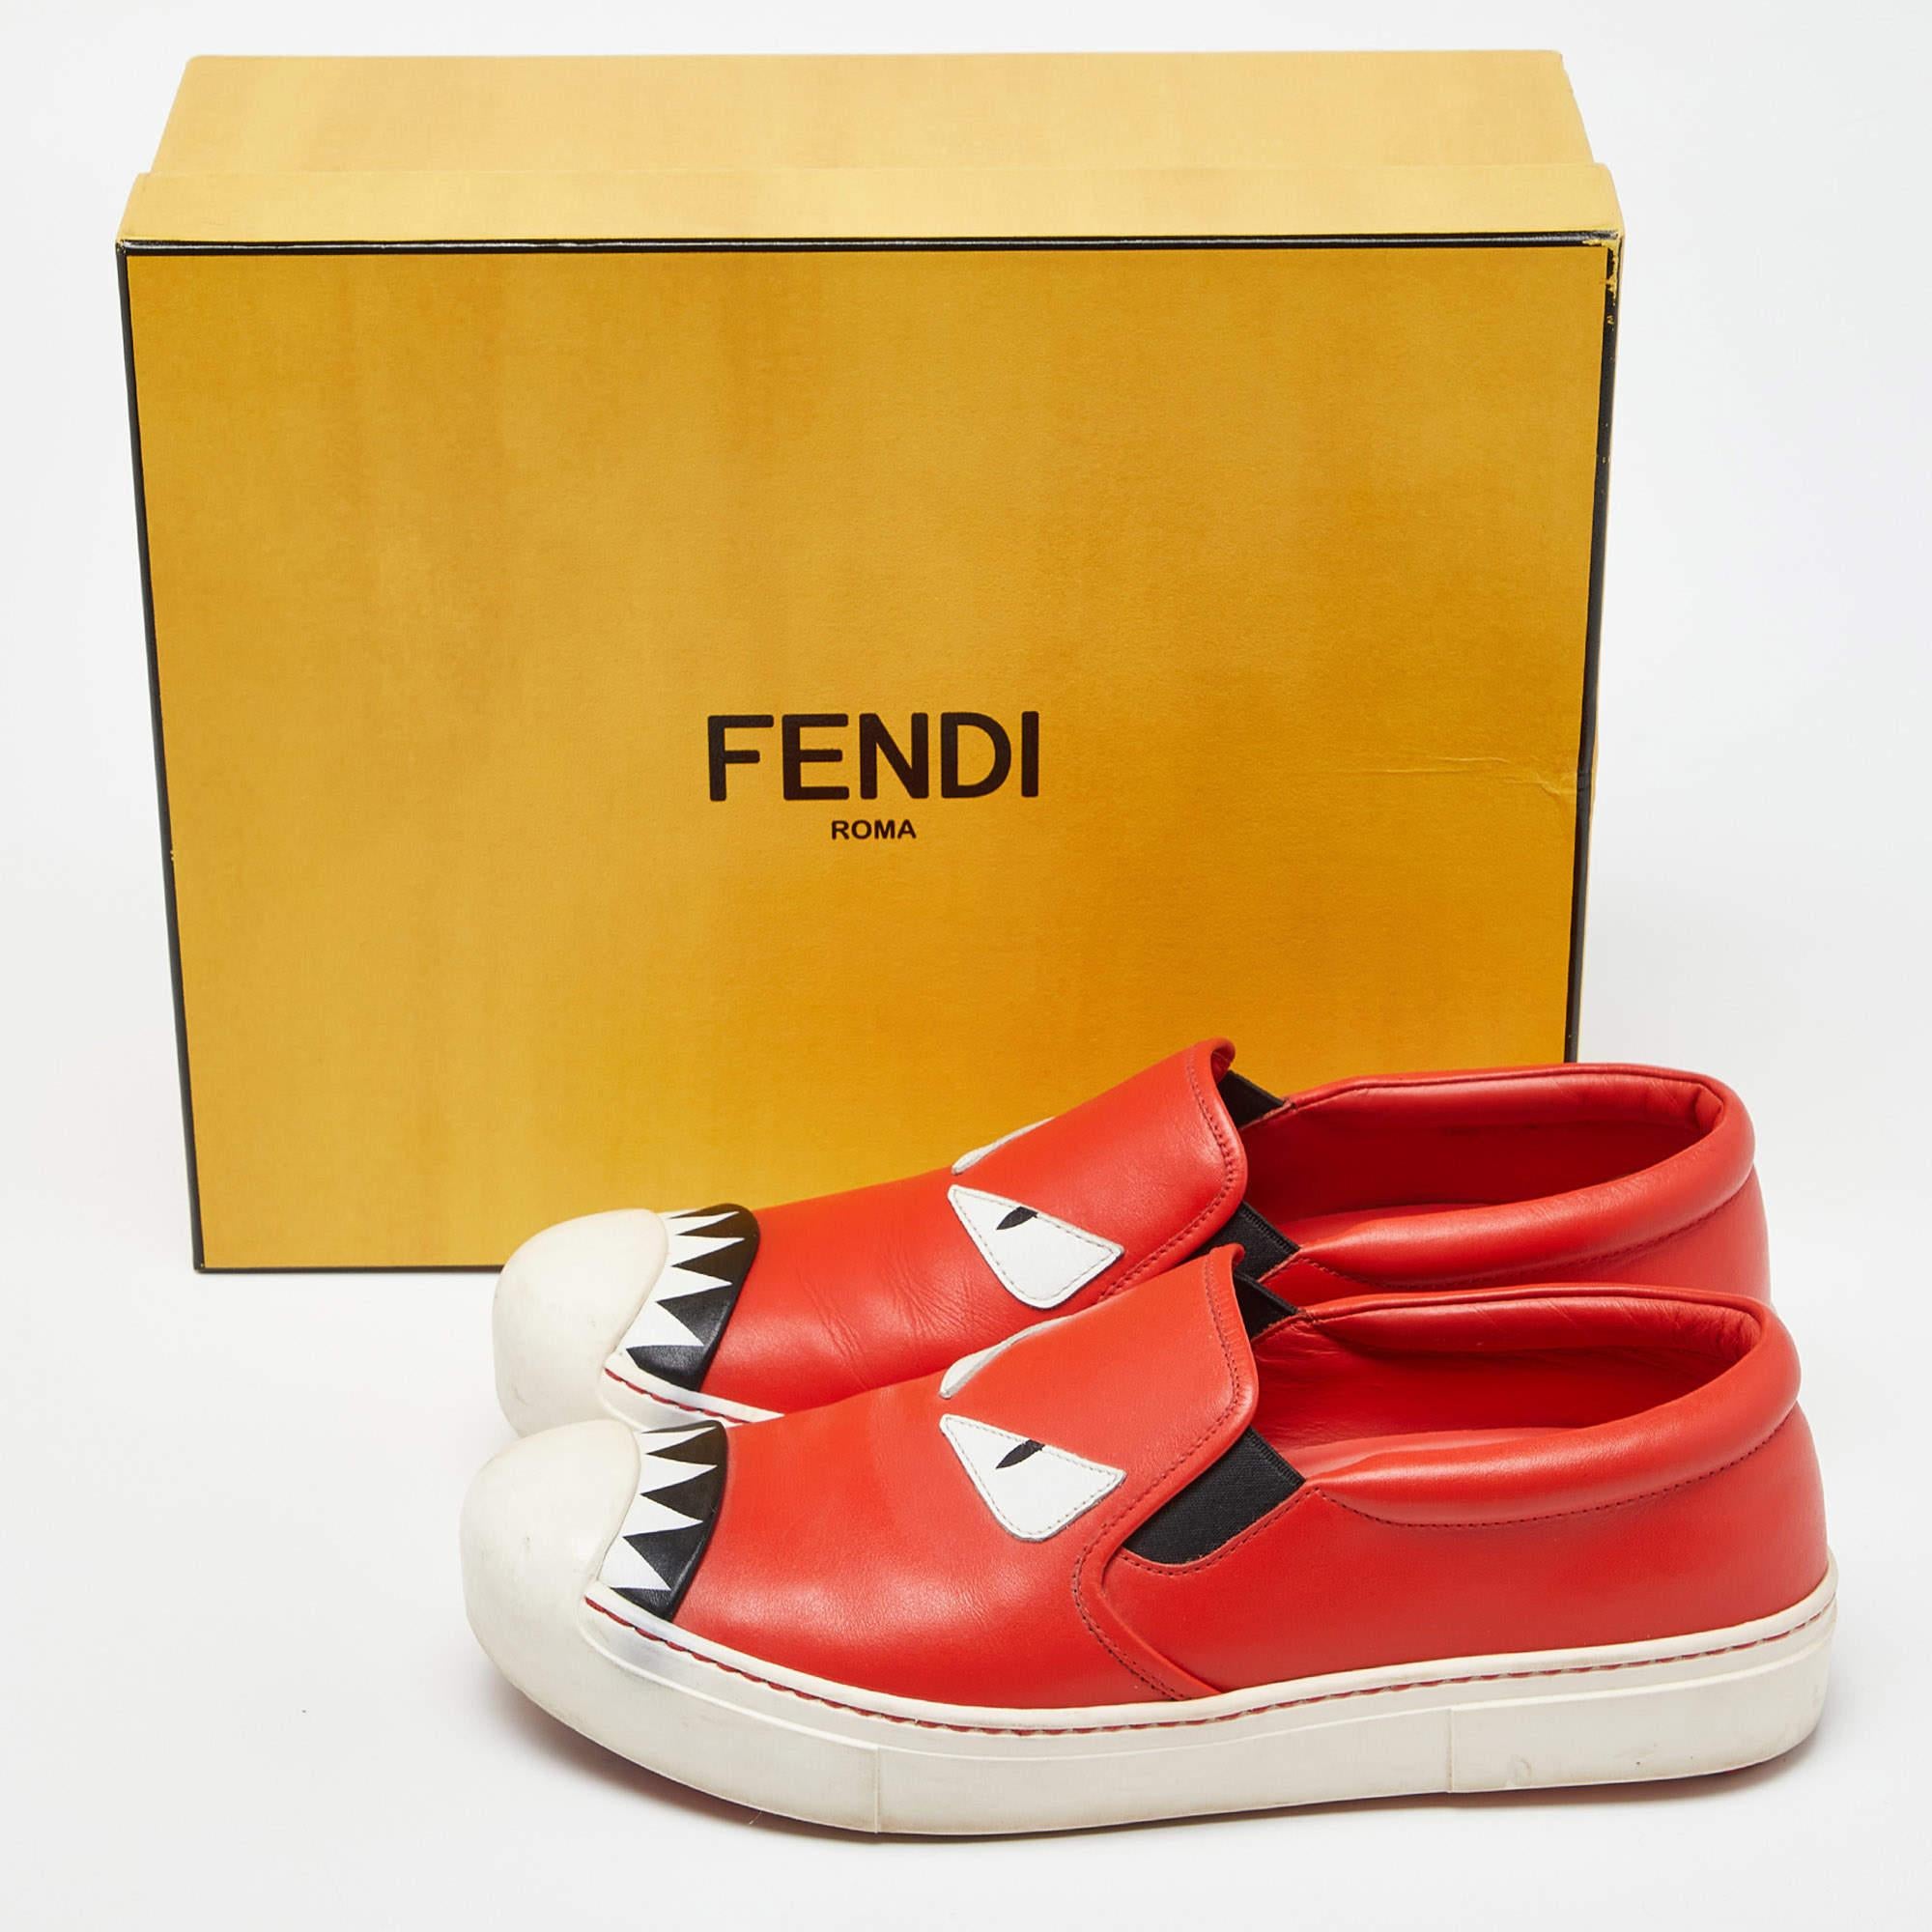 Fendi Tri Color Leather Monster Slip On Sneakers Size 38.5 For Sale 5